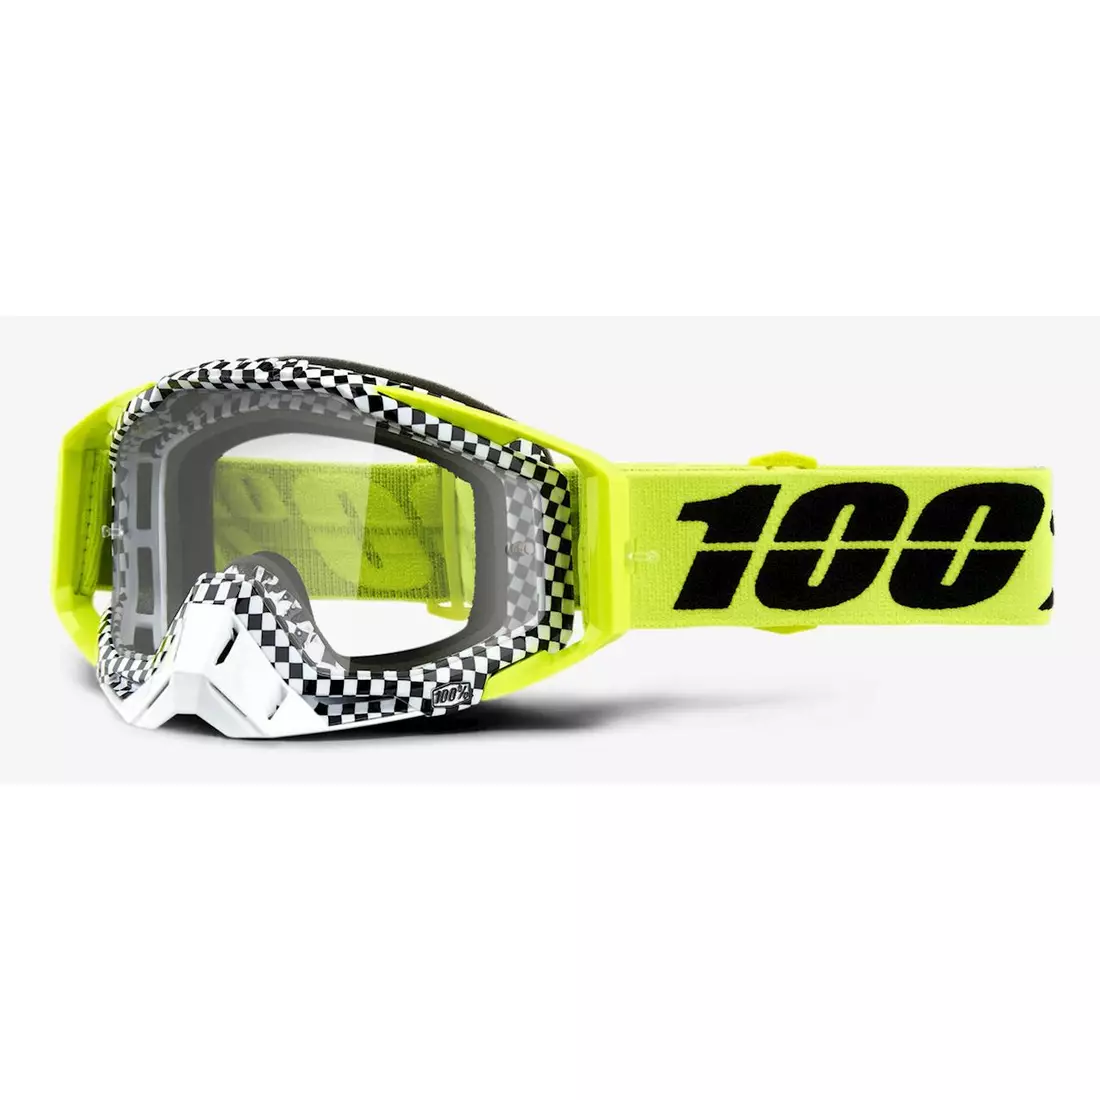 100% bicycle goggles racecraft andre (Anti-Fog silver mirror lens + Anti-Fog transparent lens + 10 breaks) STO-50110-315-02